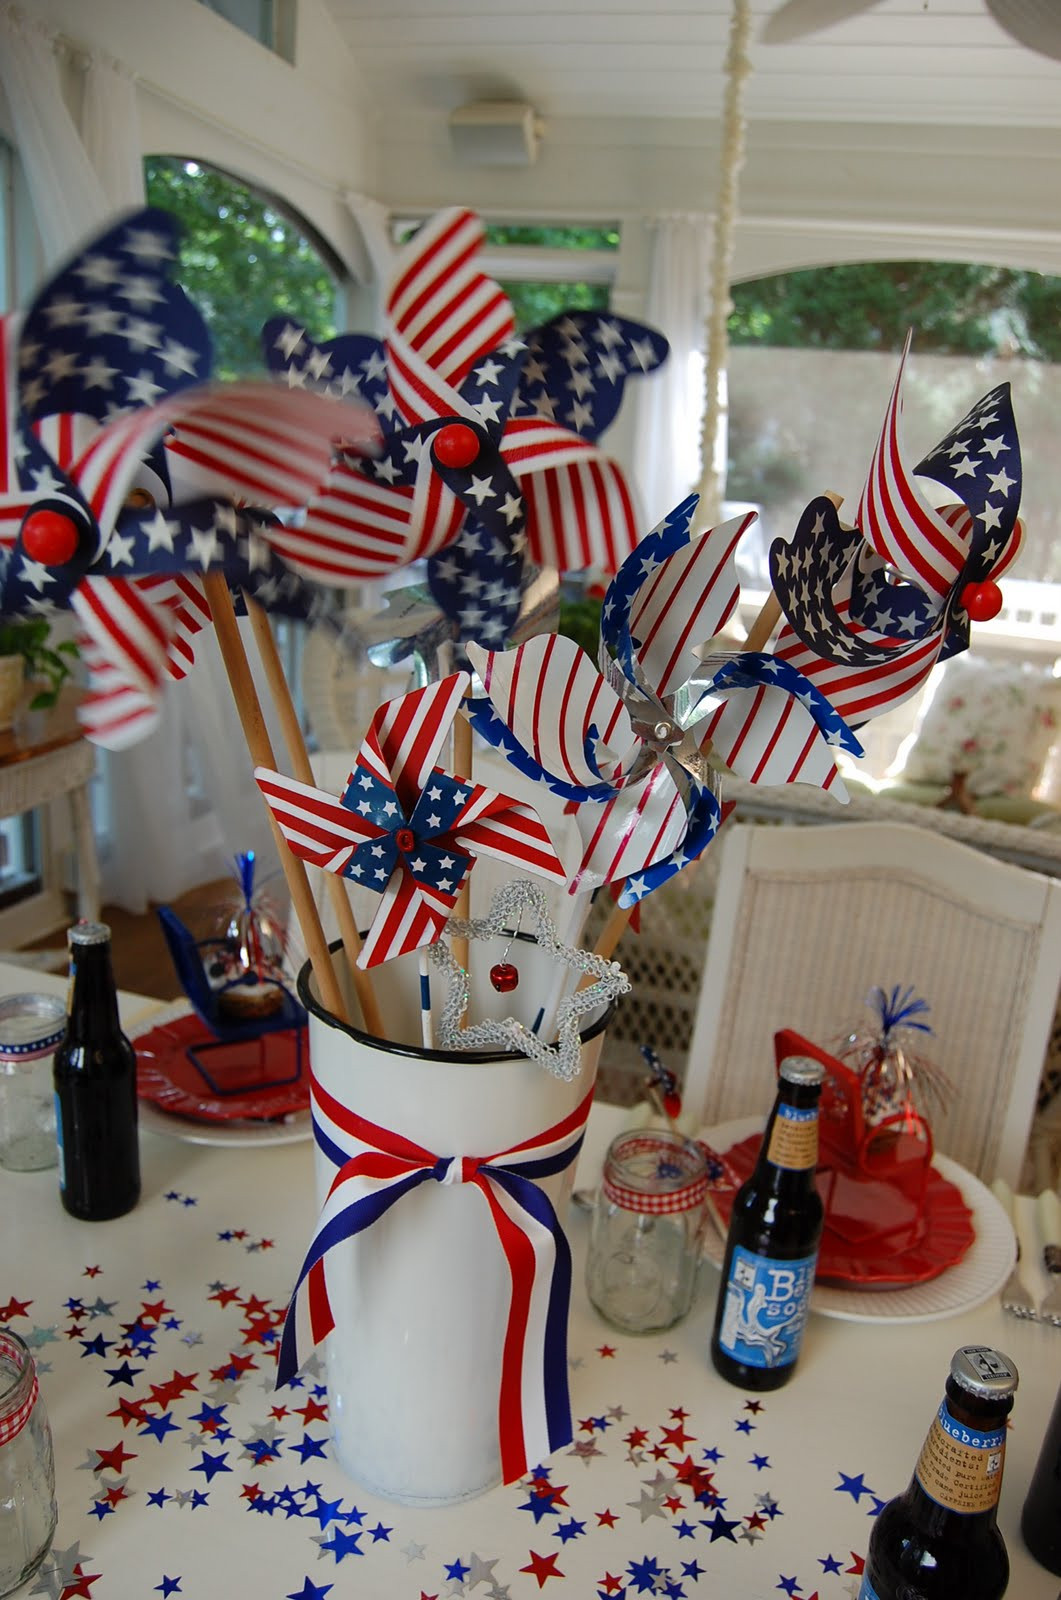 4th Of July Ideas
 A Patriotic Celebration Table Setting